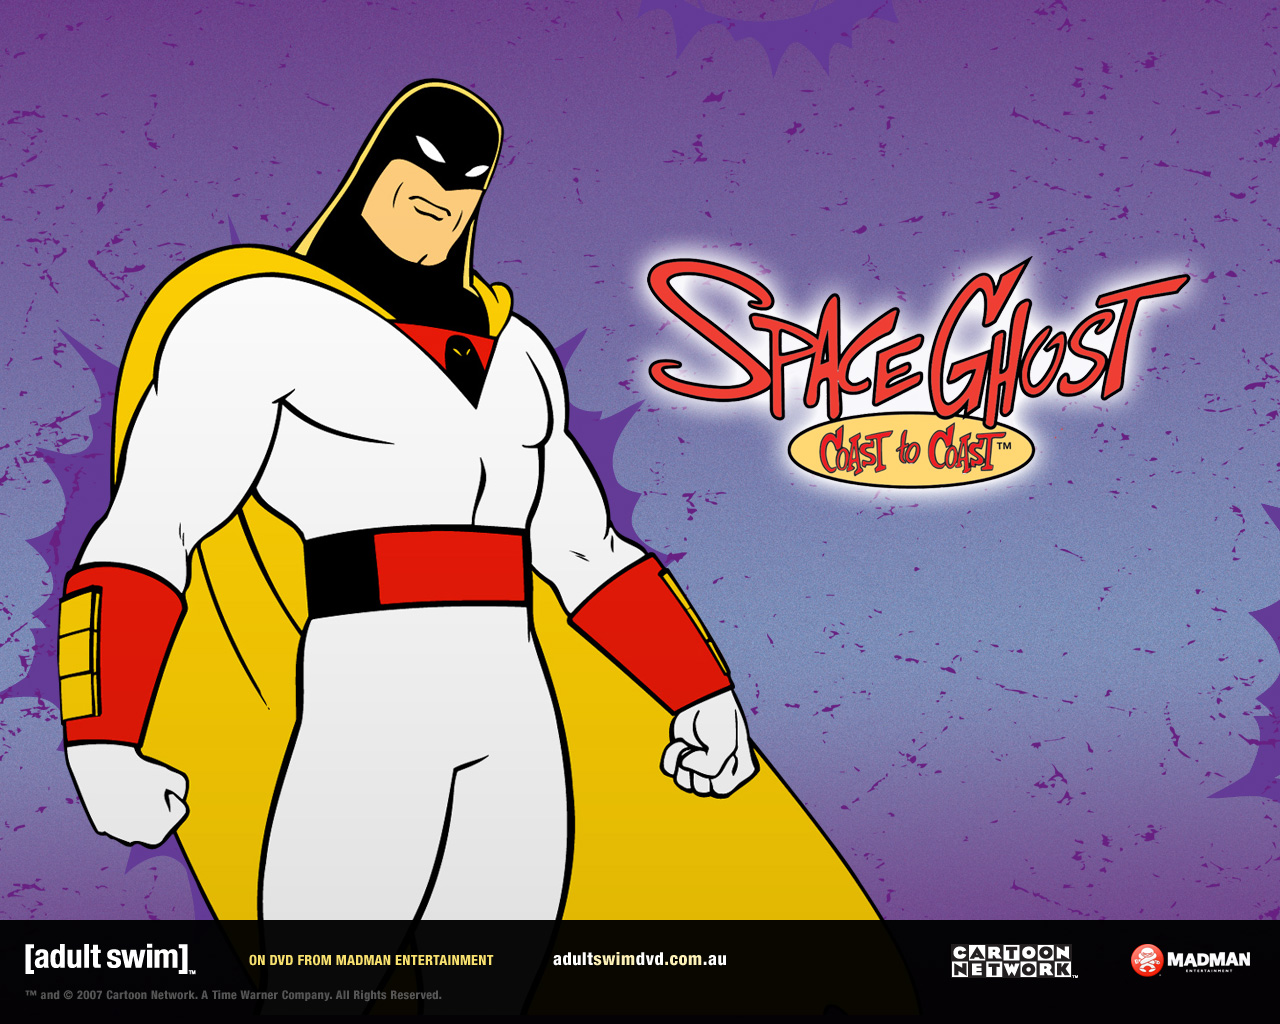 Images of Spaceghost | 1280x1024